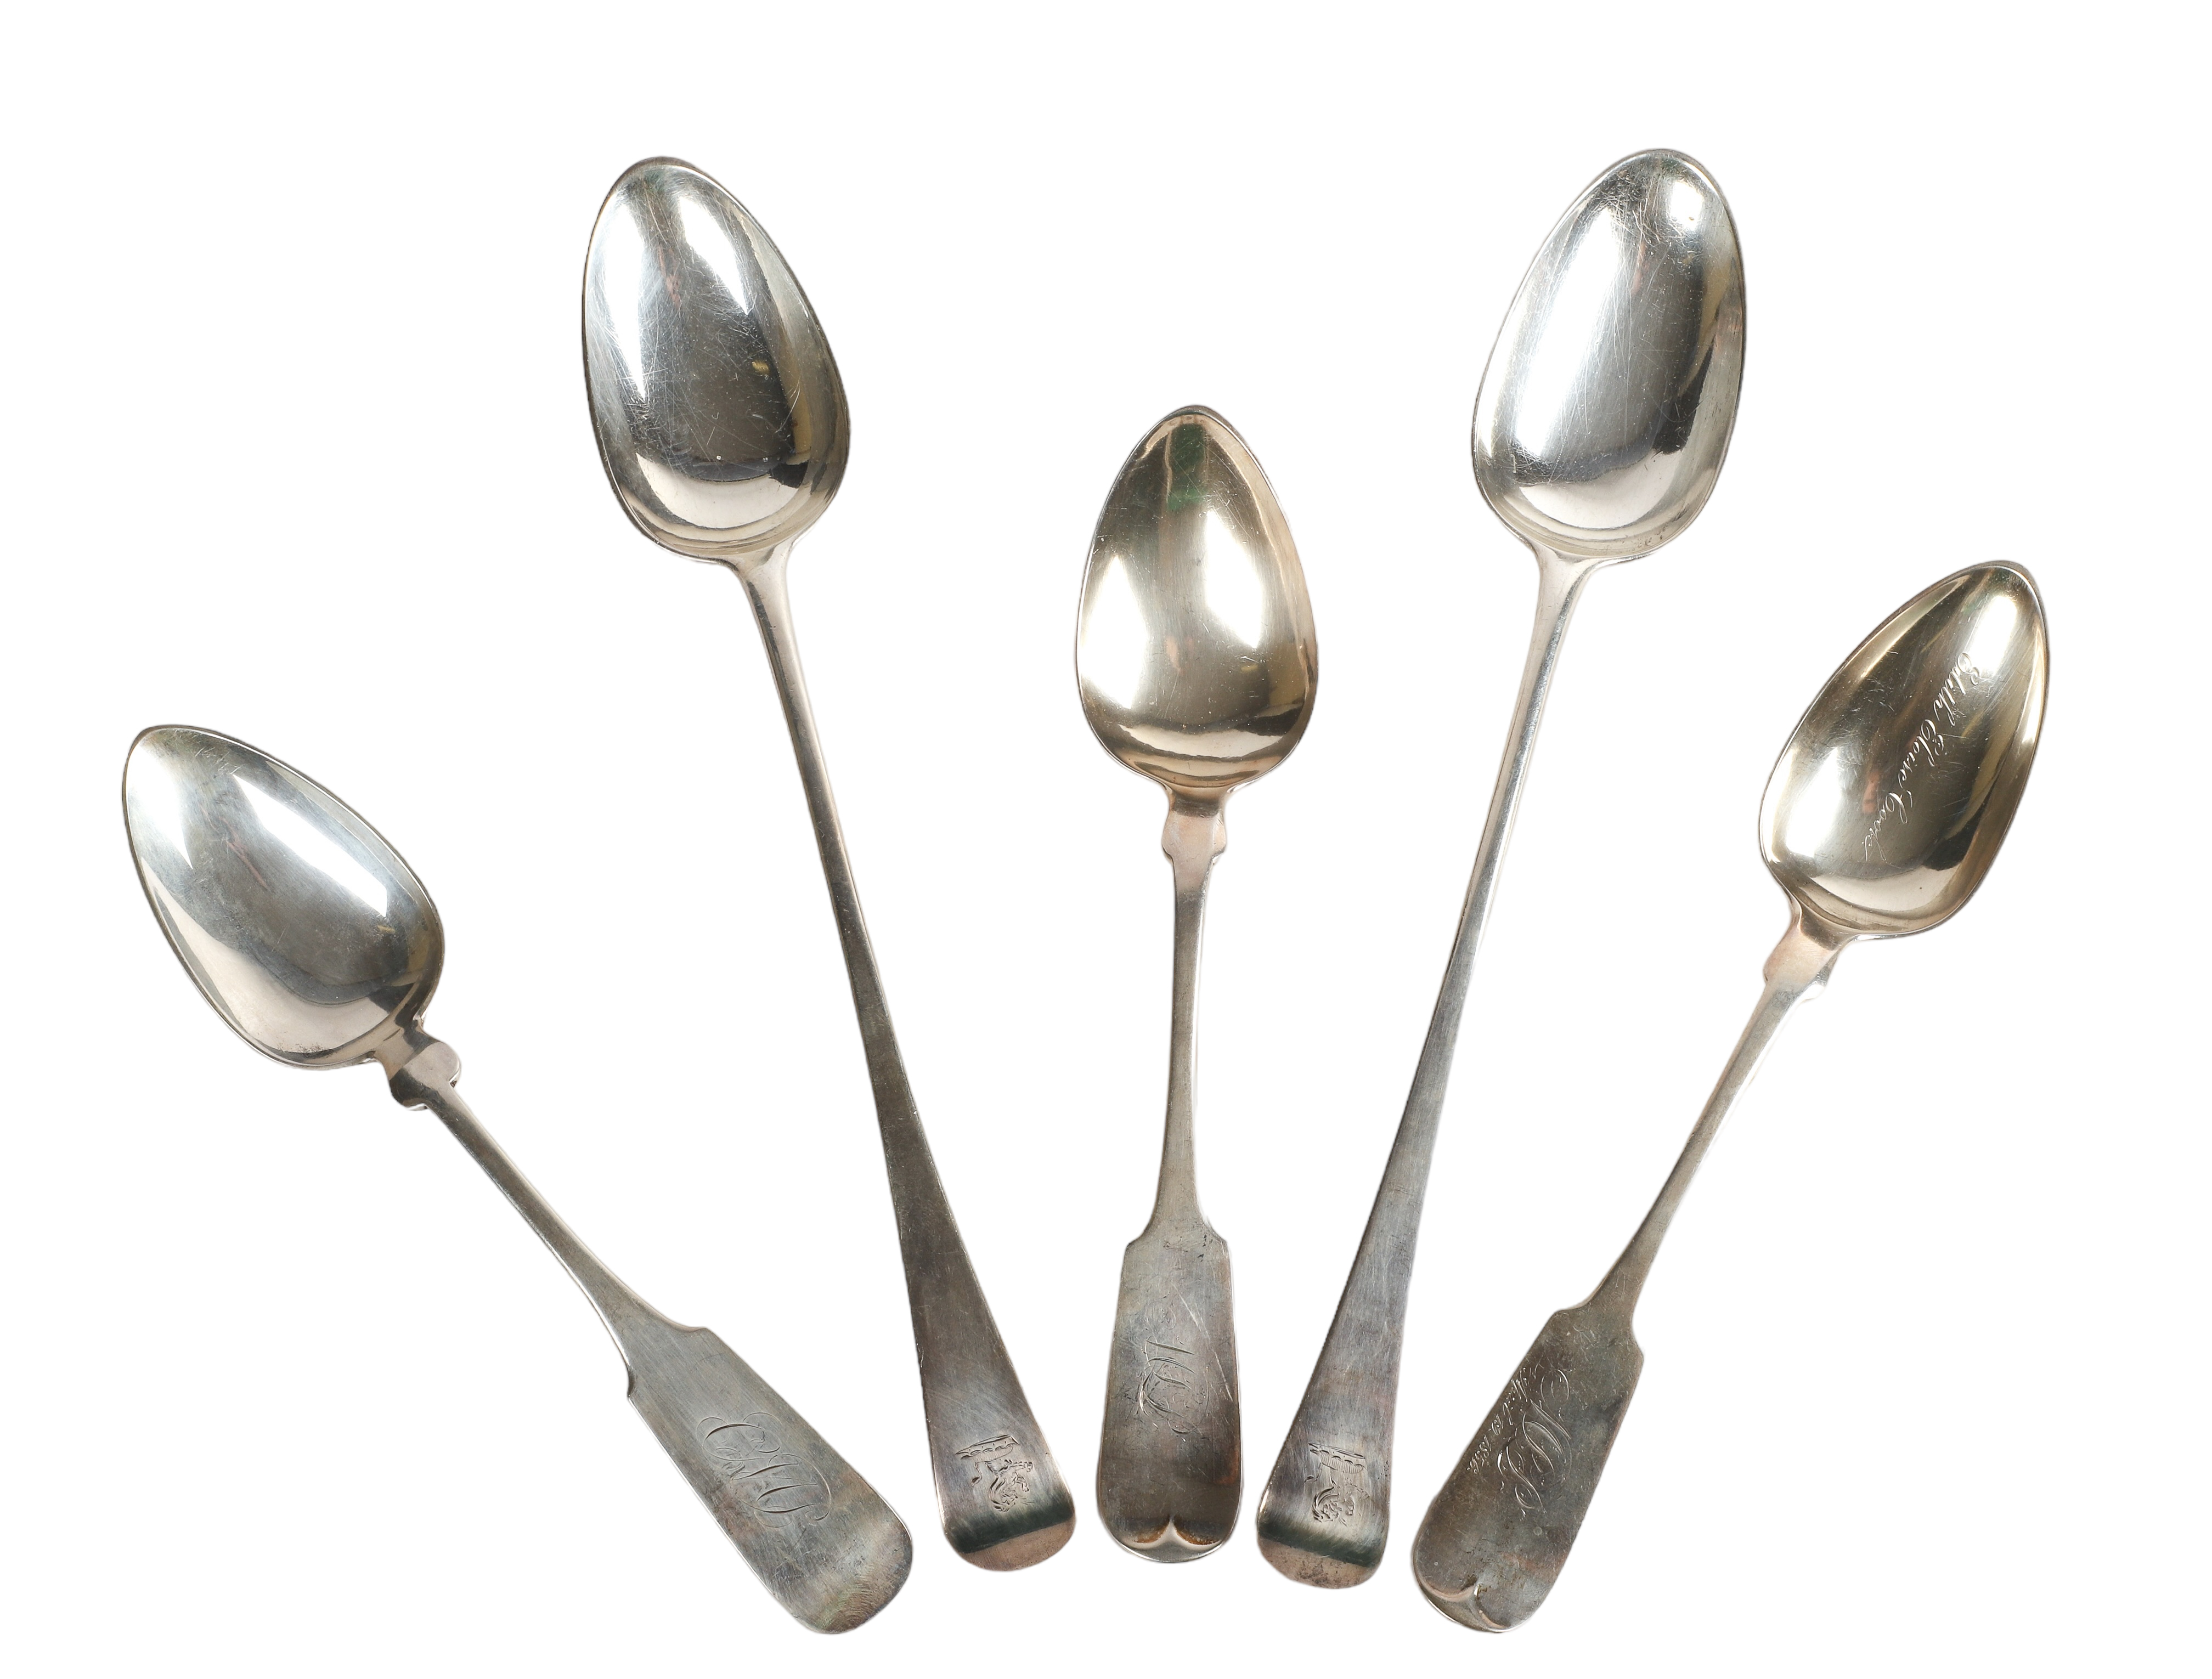  5 Coin silver and sterling spoons 3b0f0f